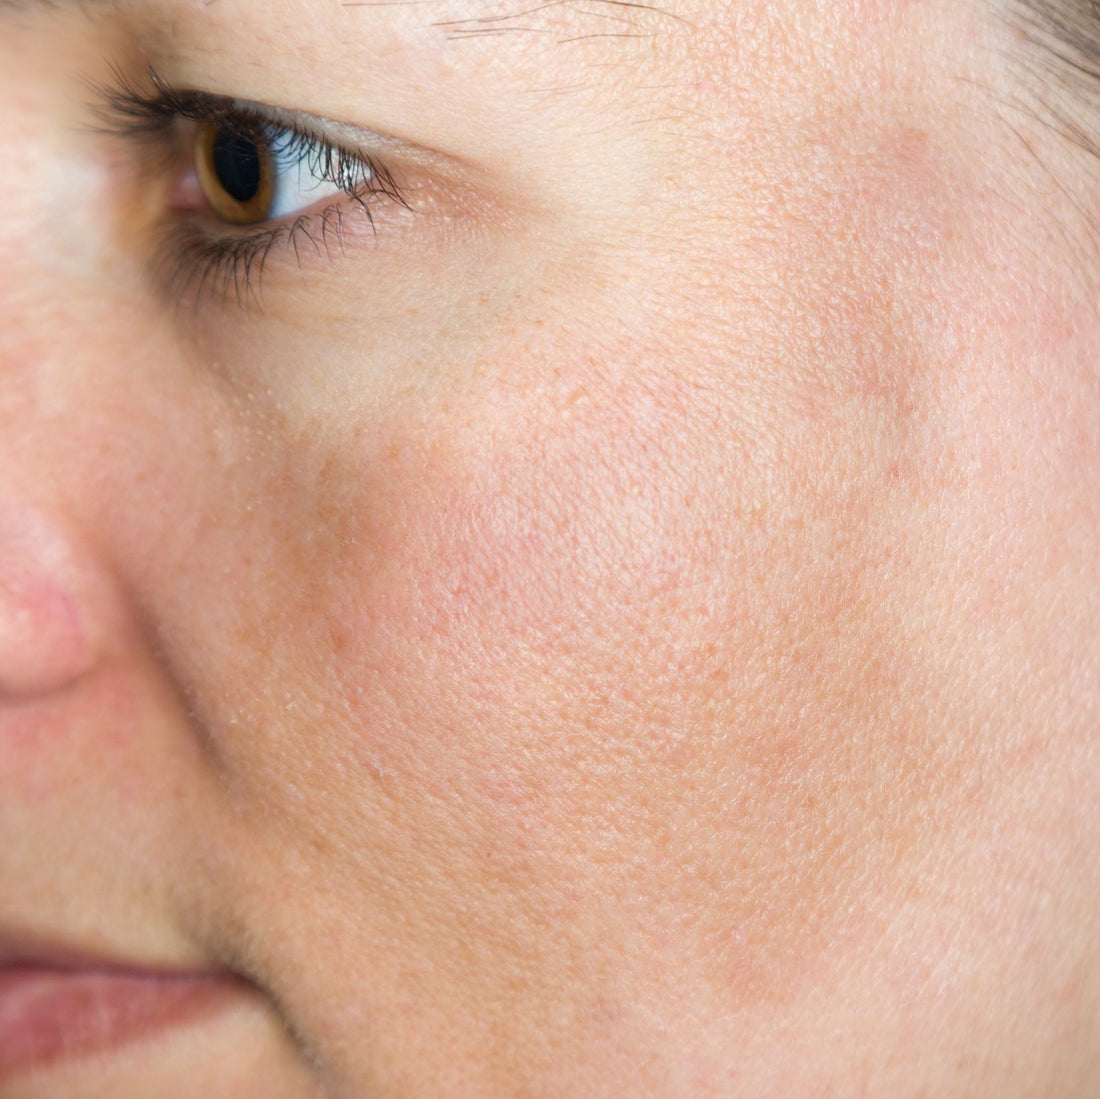  The mask of pregnancy: FILORGA explains everything you need to know about melasma.